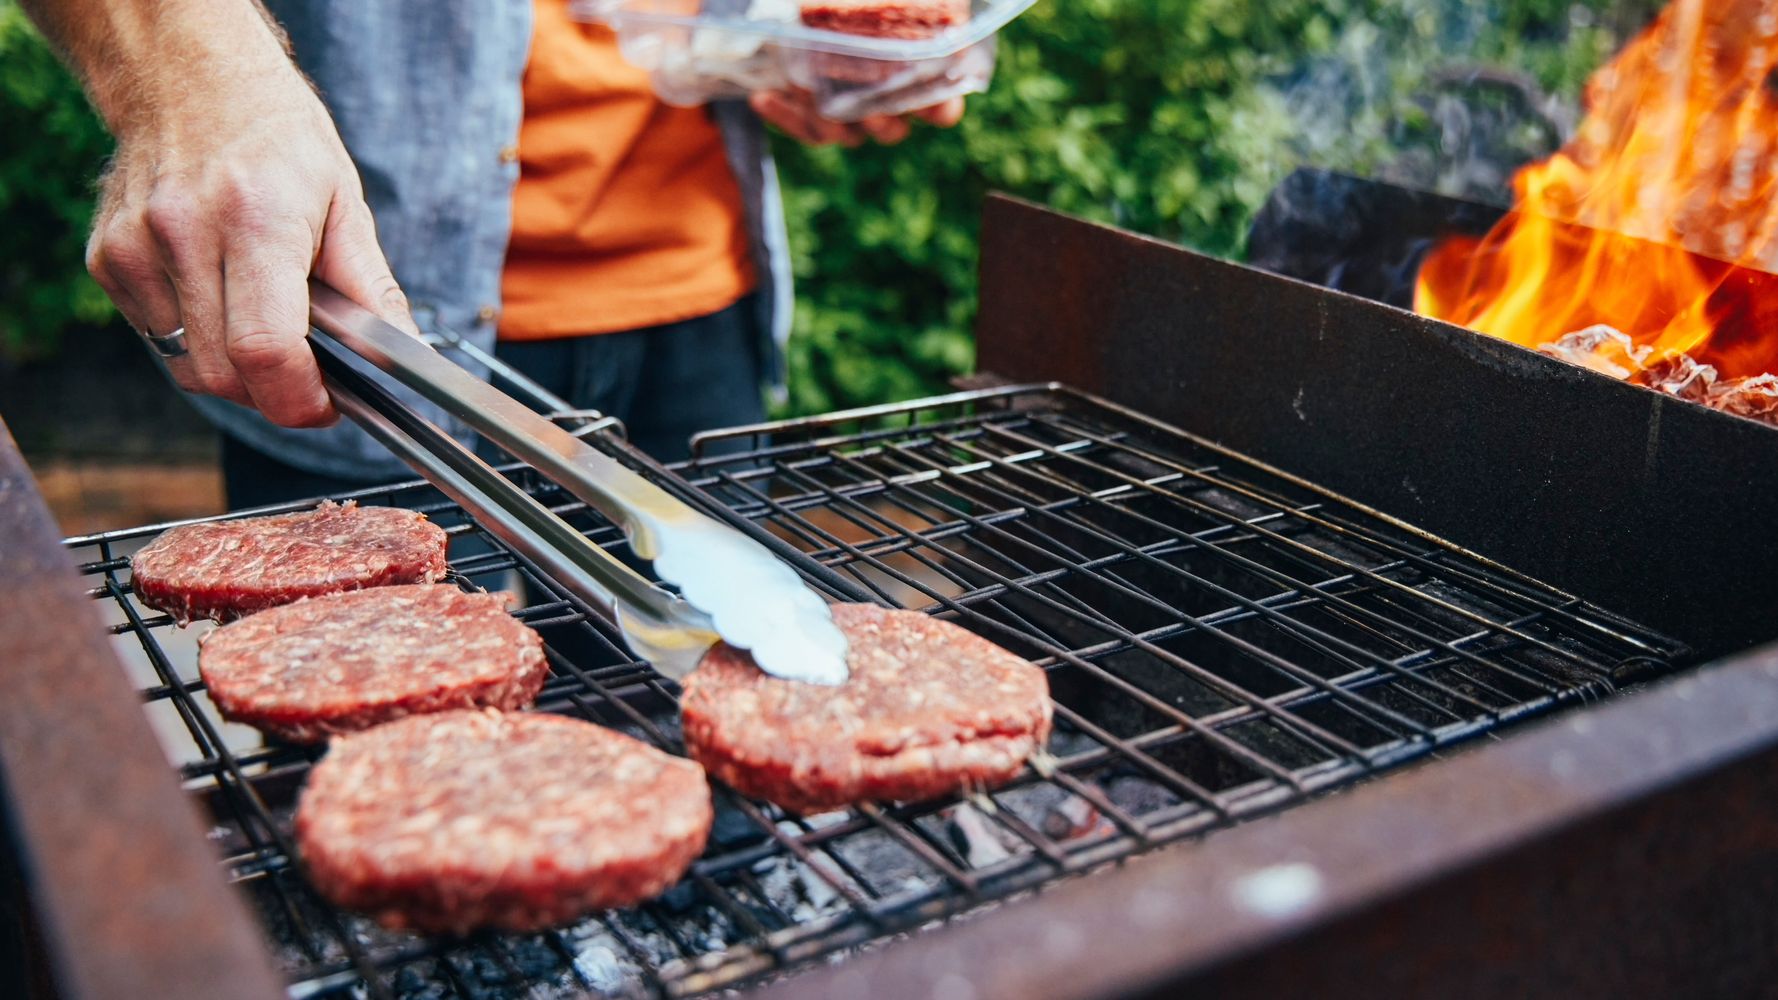 The Biggest Grilling Mistake People Make, According To Grill Masters